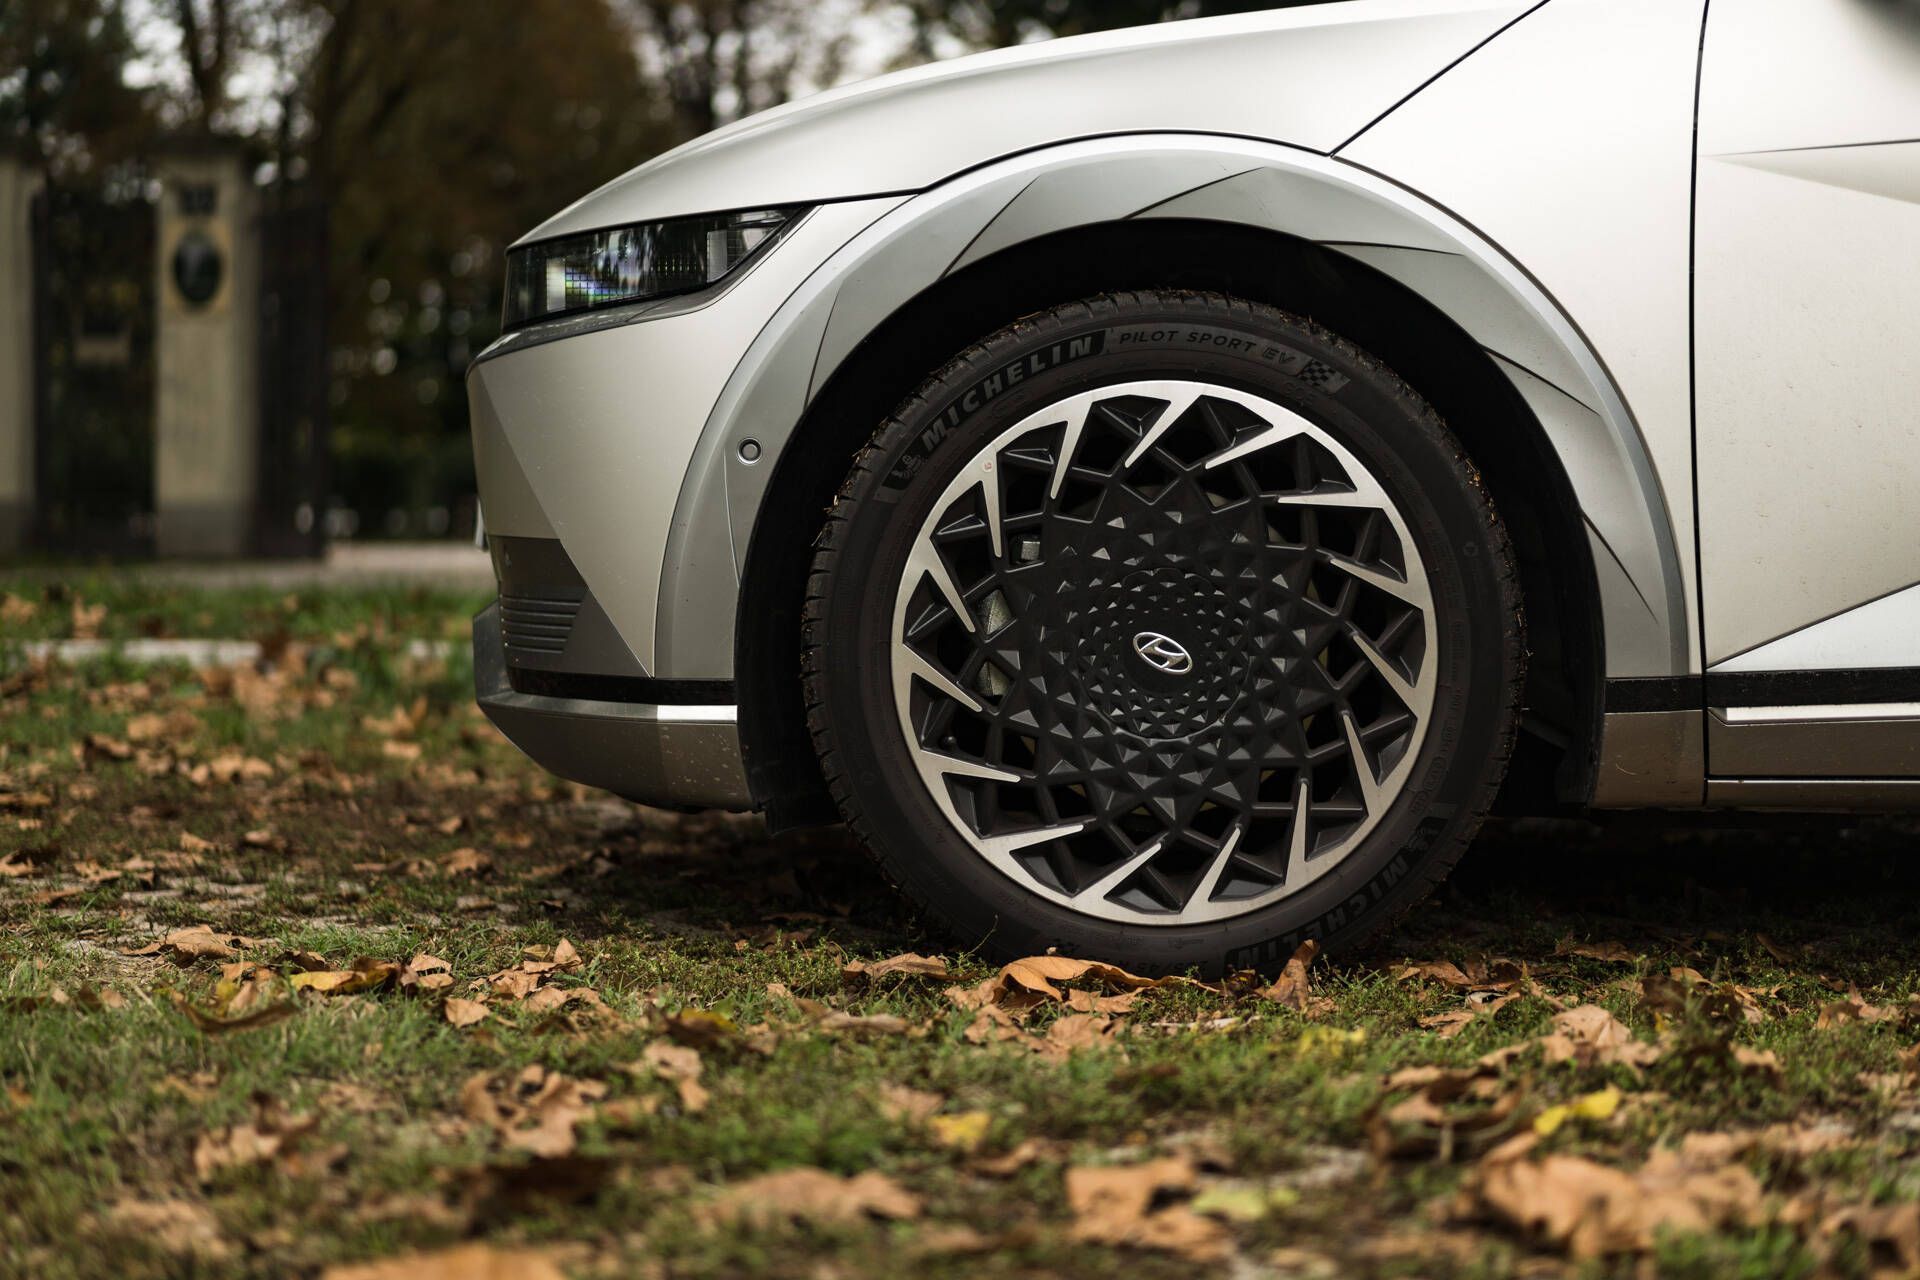 Which tyres should you choose for your electric car?